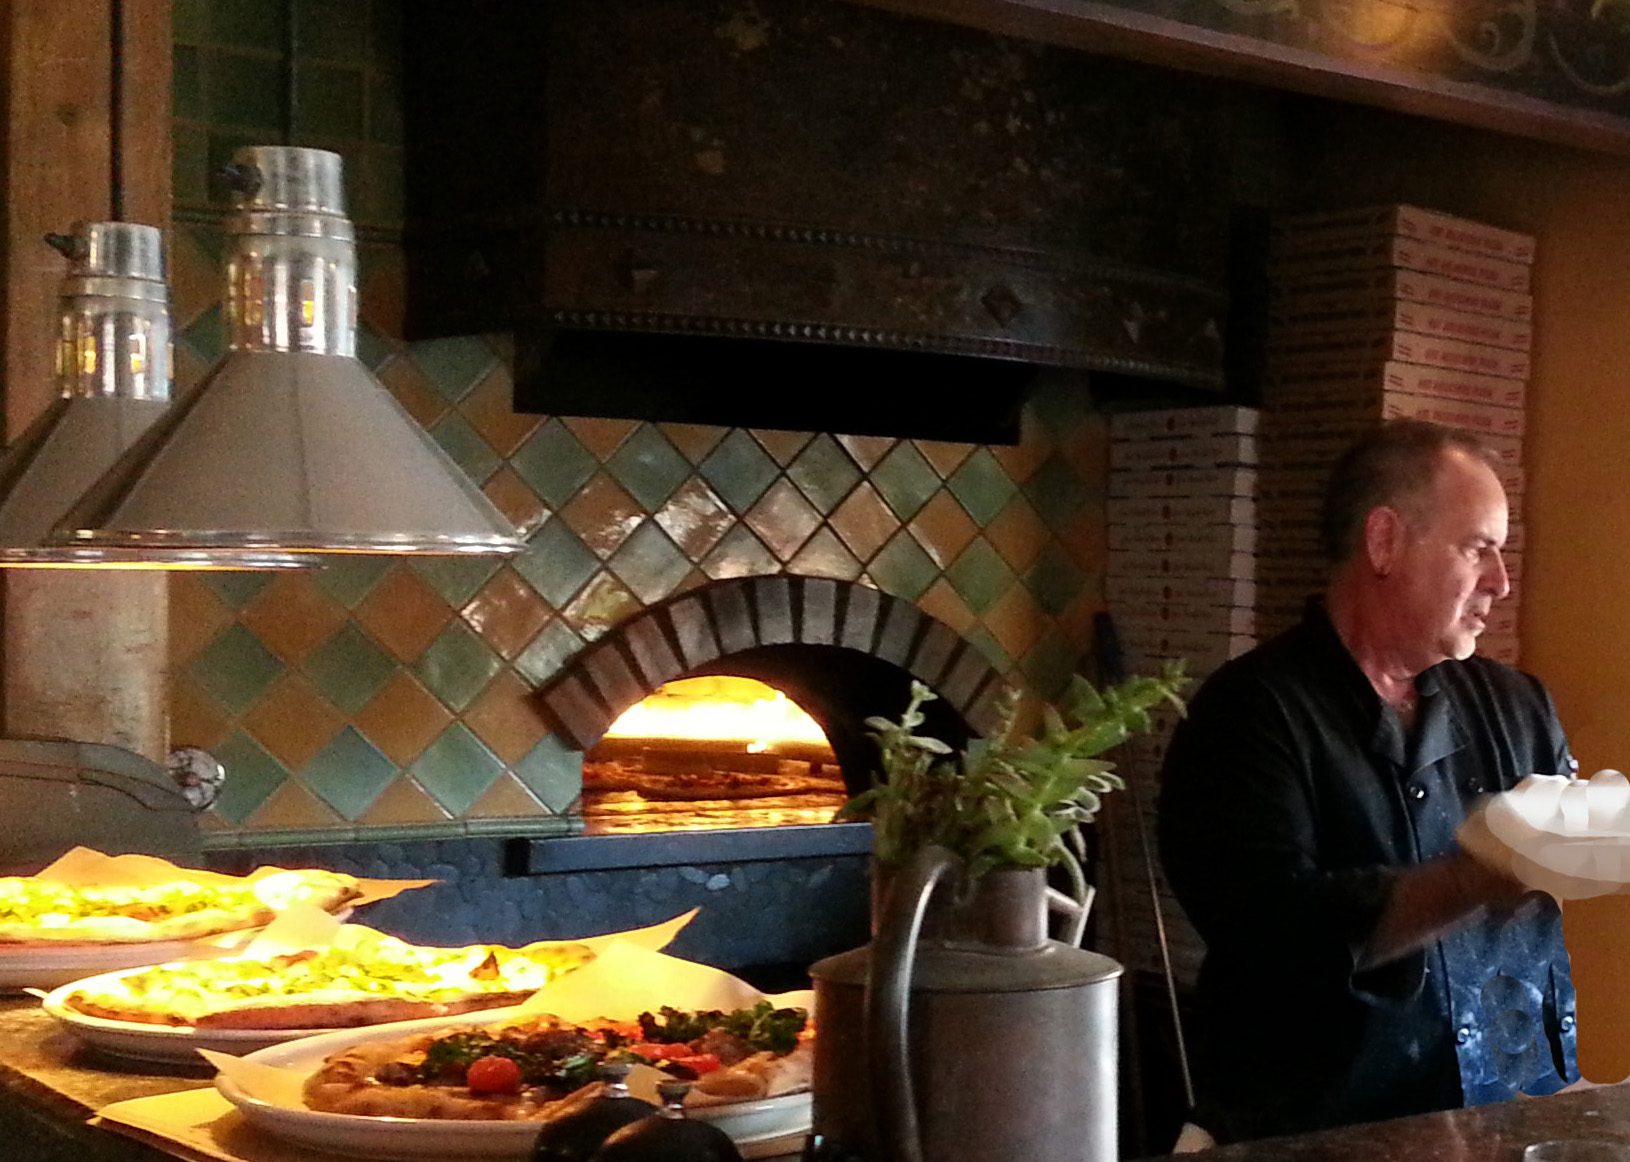 Italy and Julia Child inspire Solvang chef